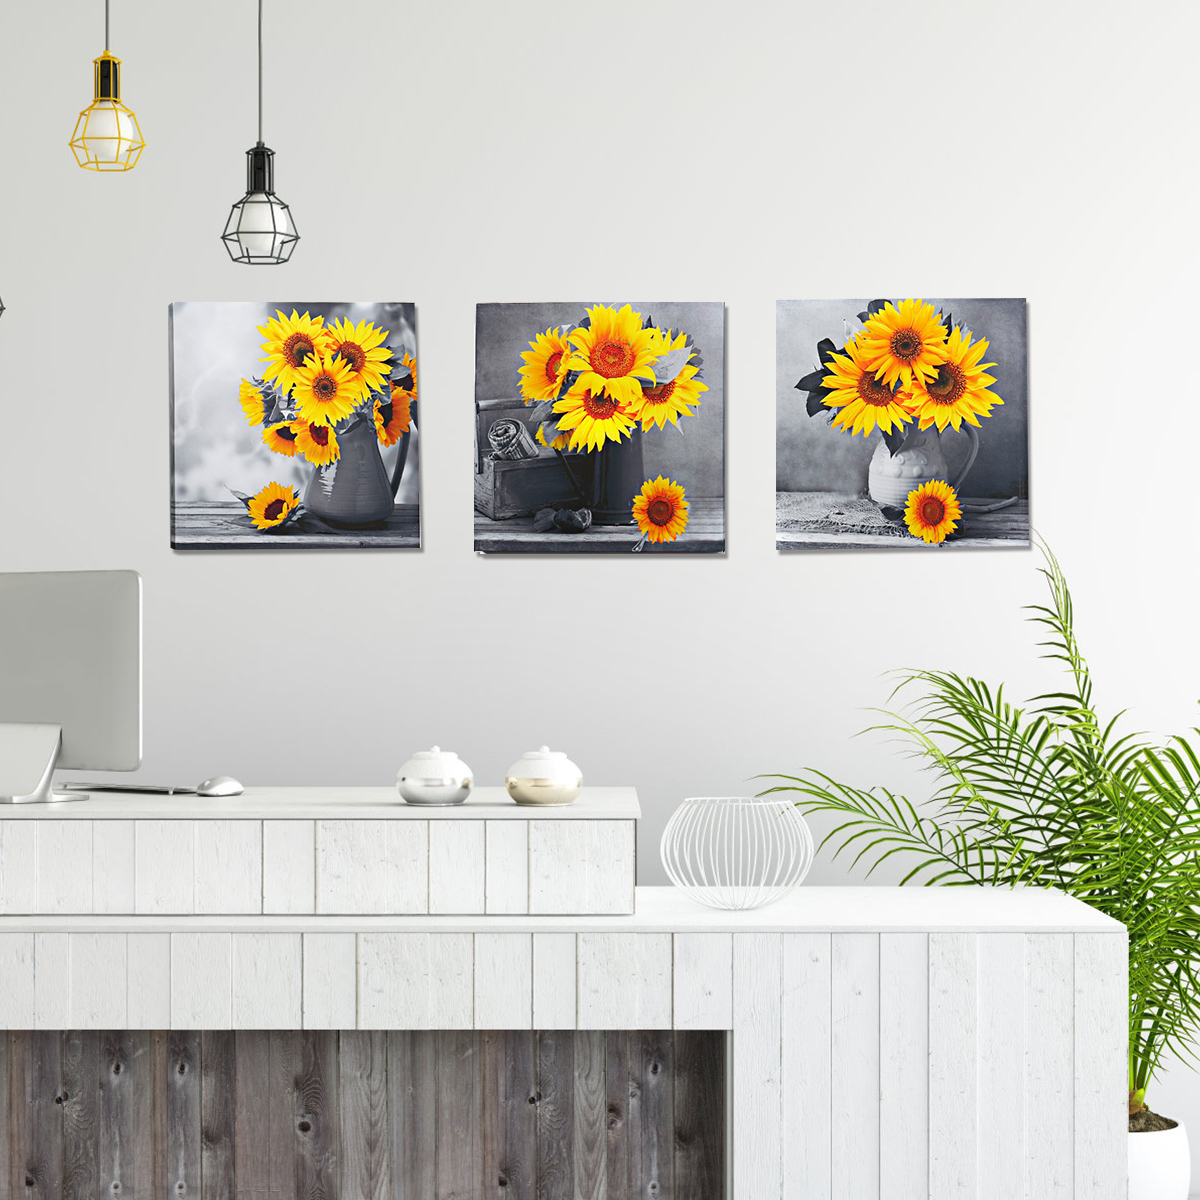 30303-cm-Sunflower-Wall-Art-Painting-Living-Room-Bedroom-Hanging-Canvas-Pictures-Office-Mural-Decora-1791798-6